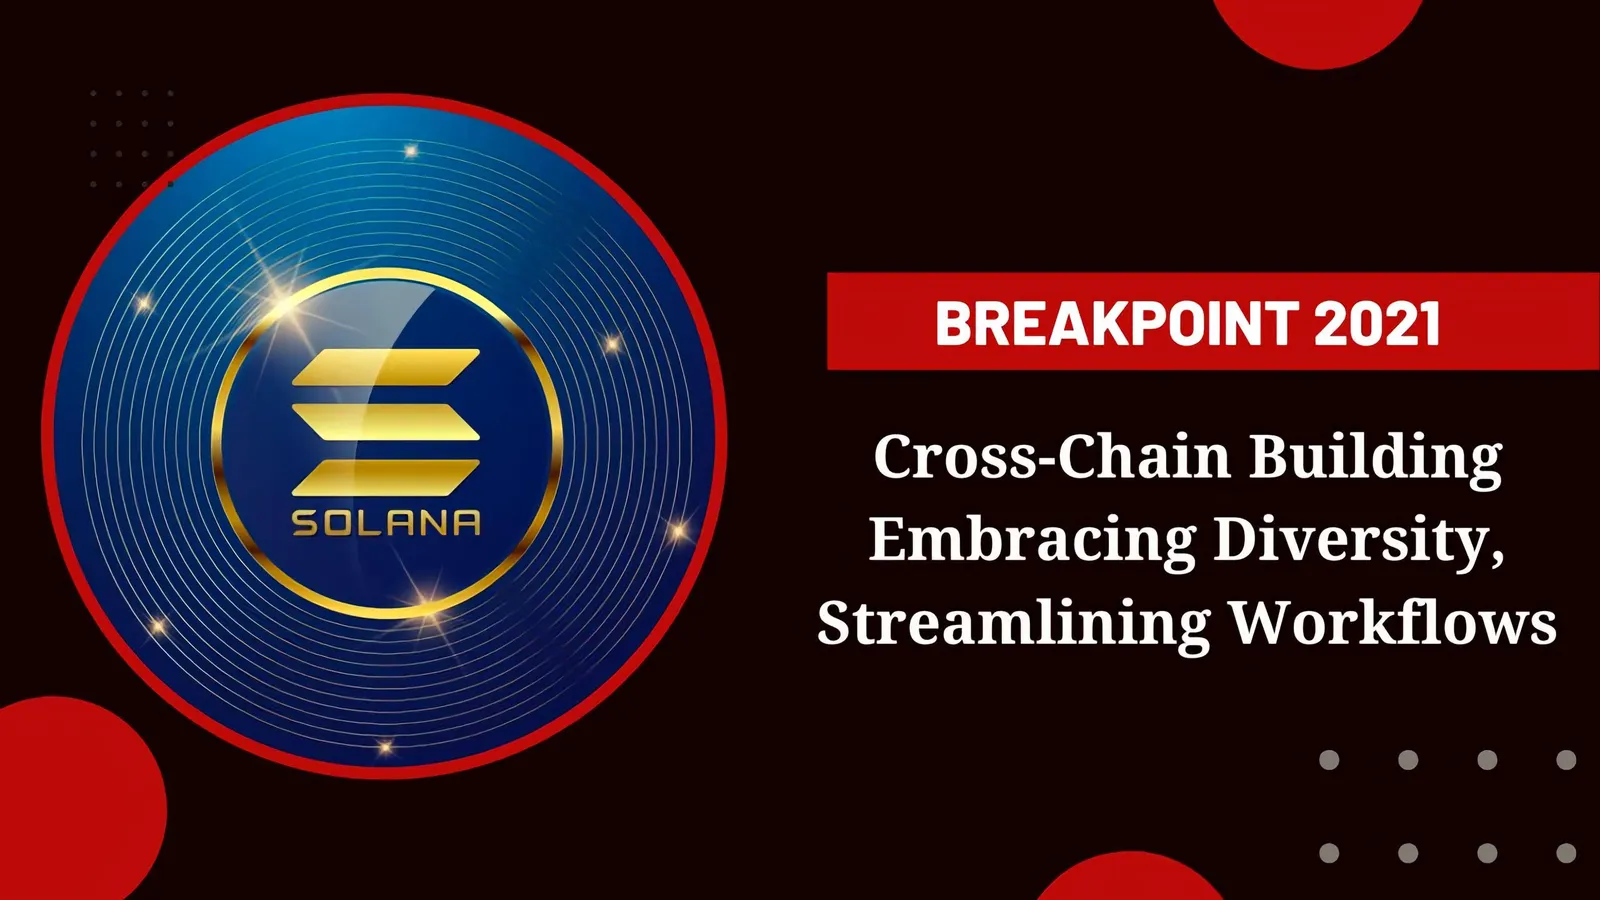 Cross-Chain Building Embracing Diversity, Streamlining Workflows